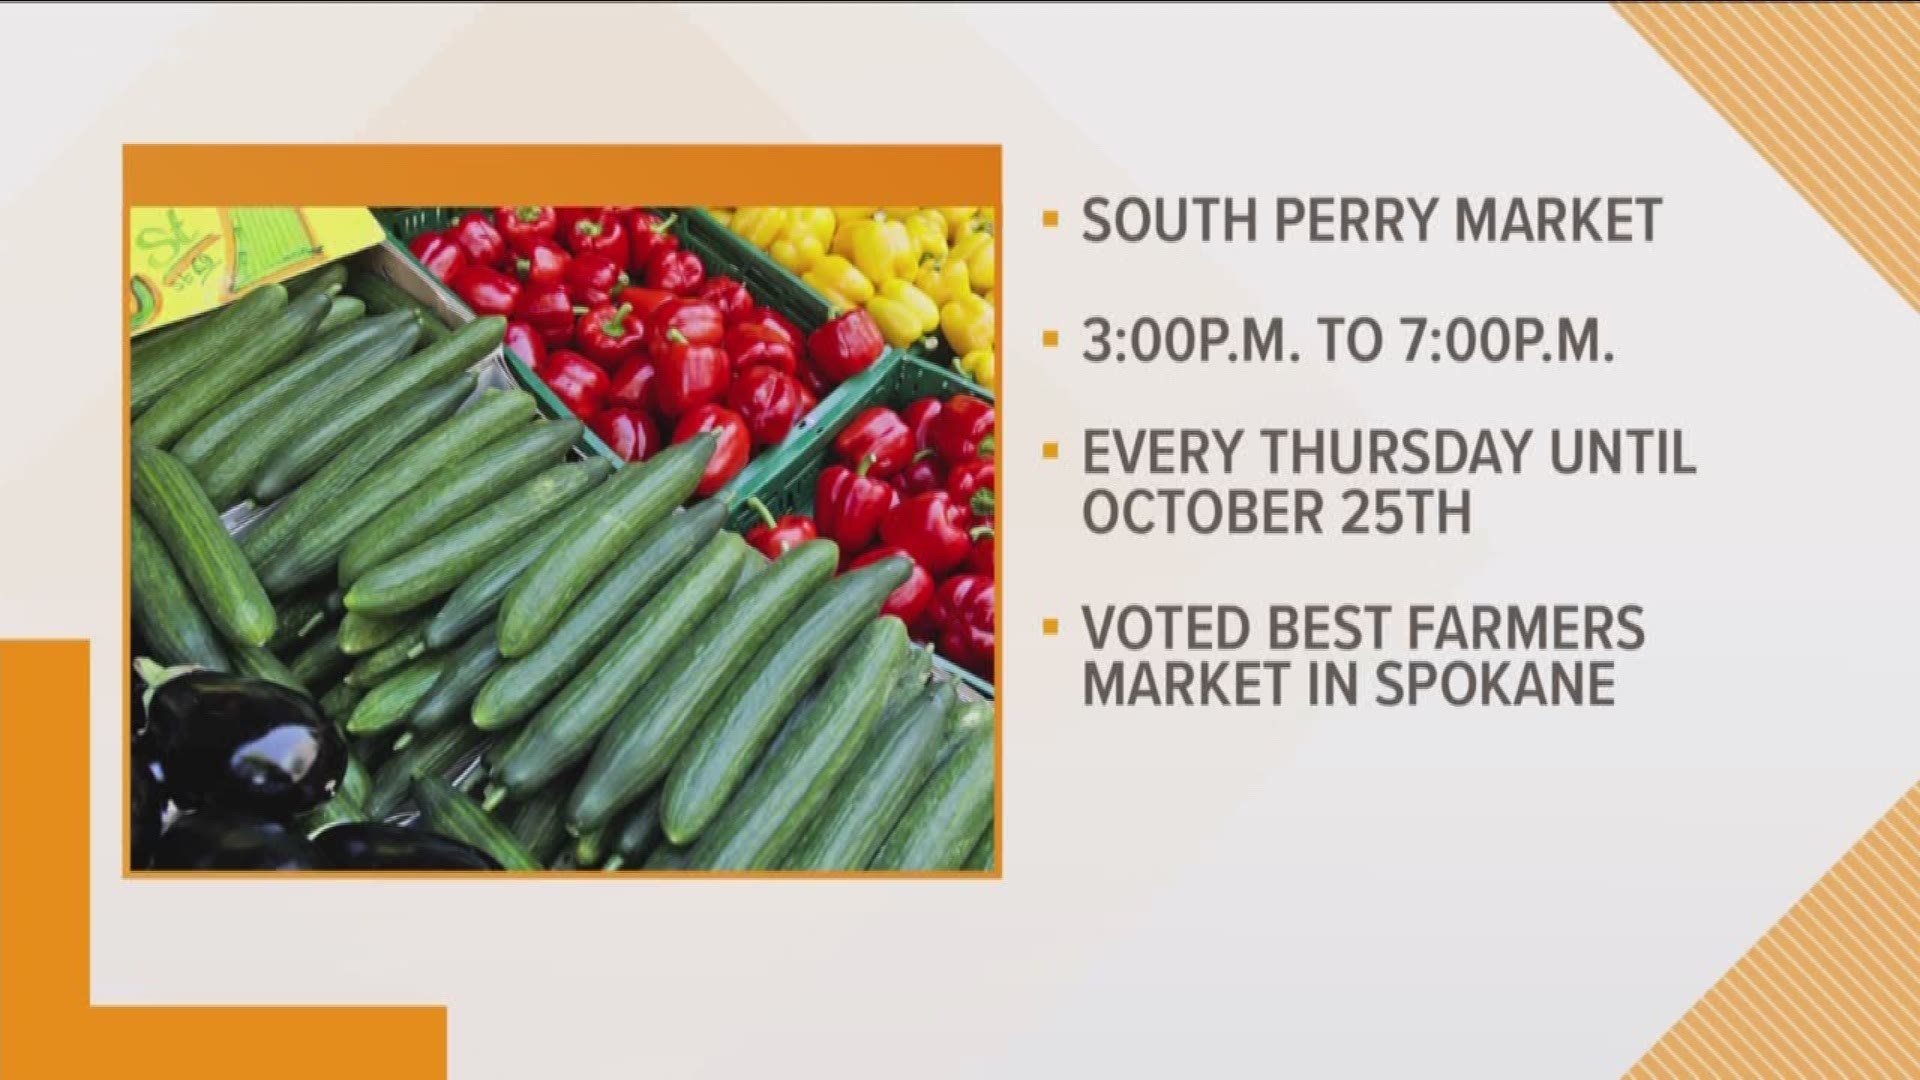 South Perry Market opens today (5-3-18)